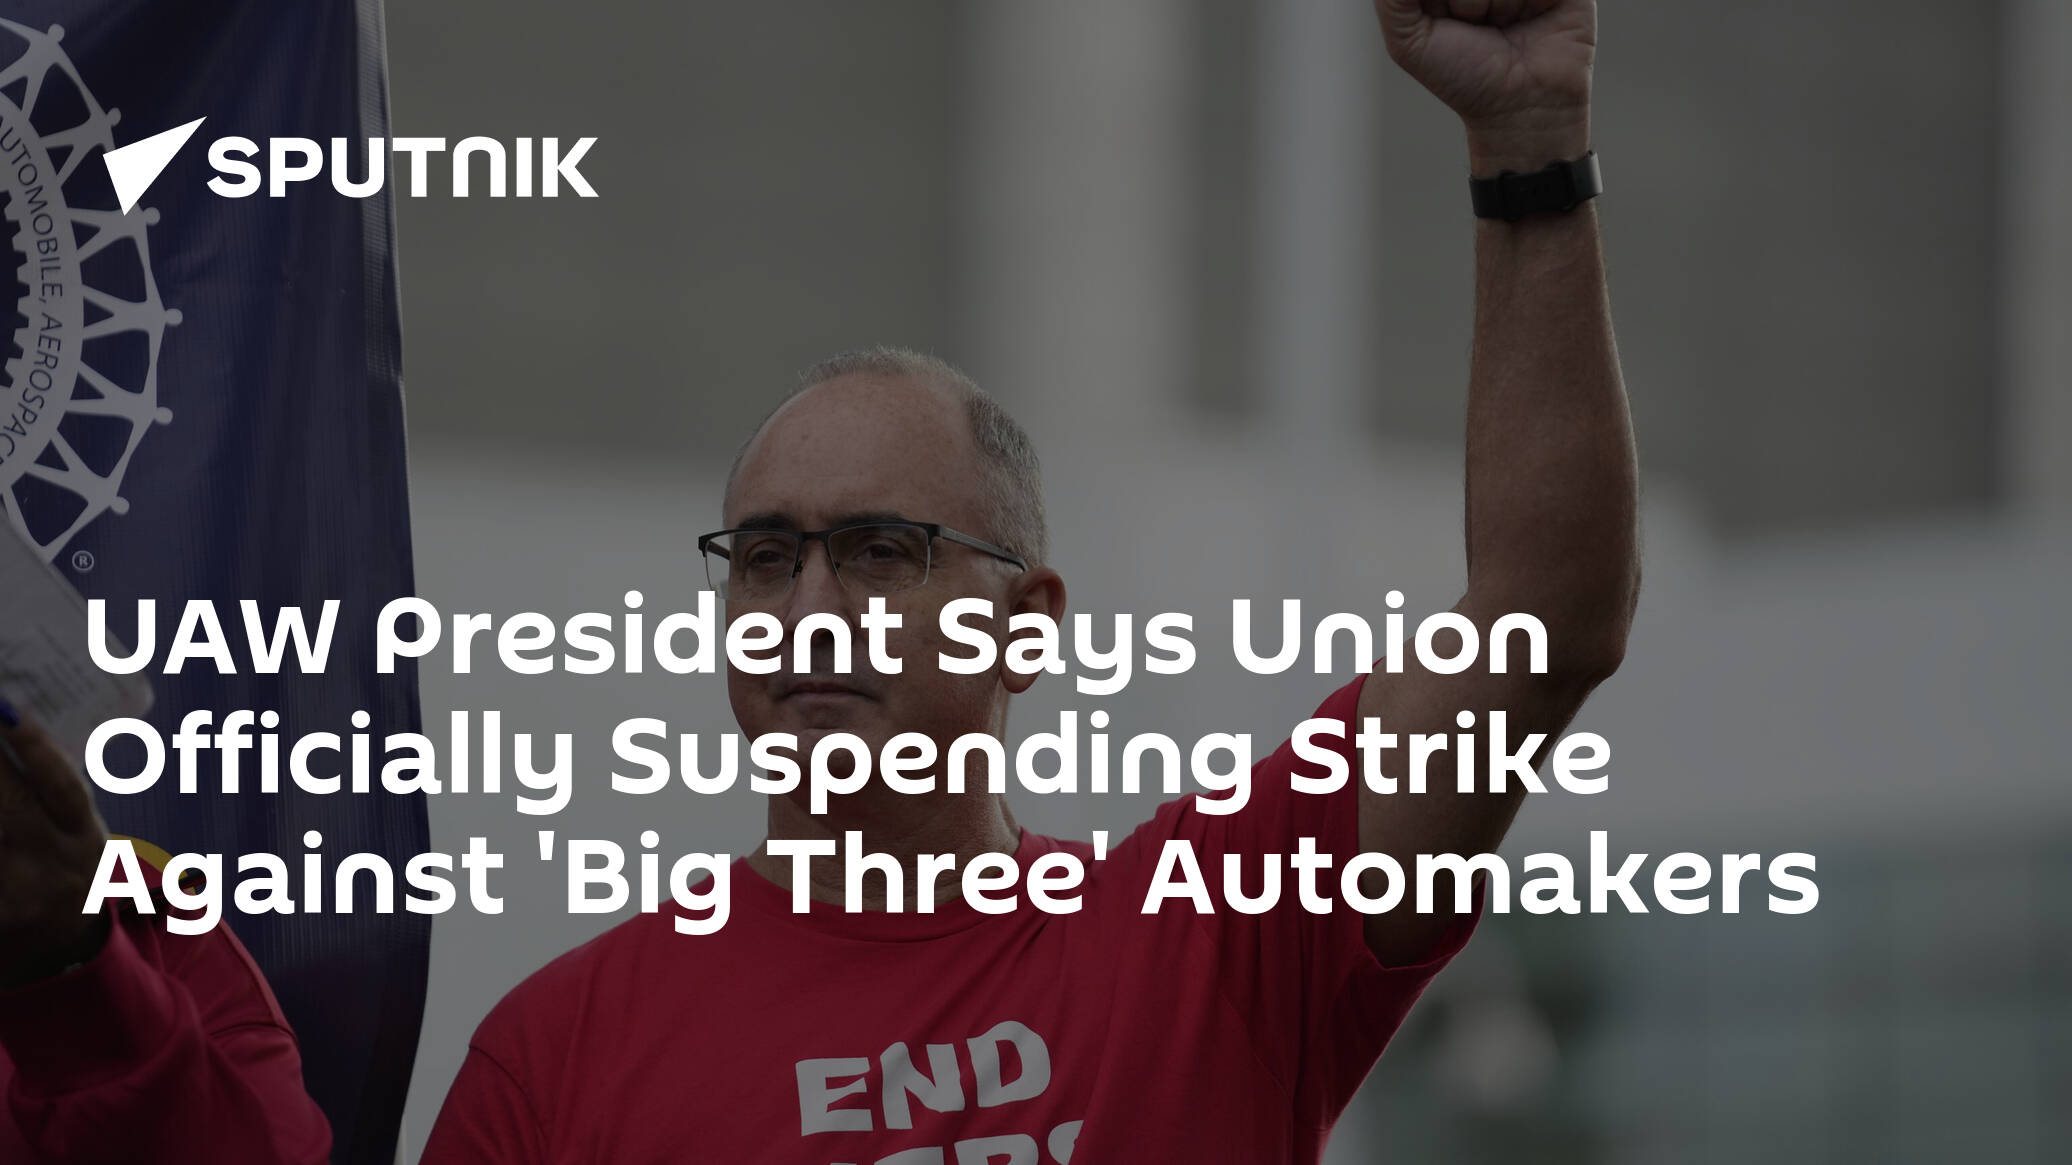 UAW President Says Union Officially Suspending Strike Against 'Big Three' Automakers